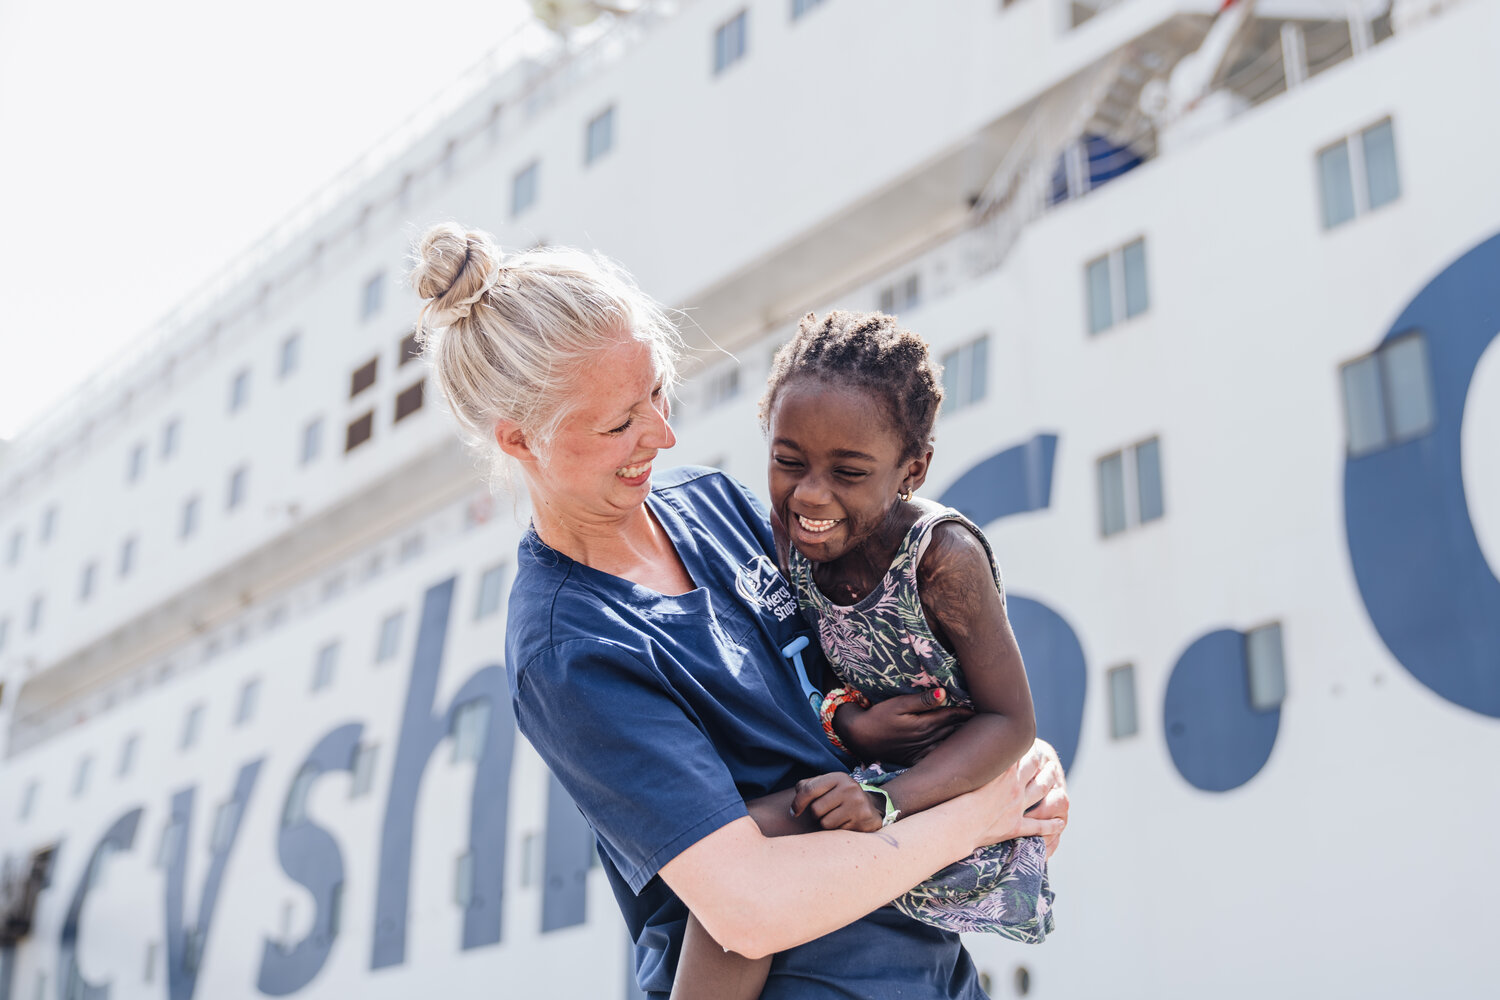 An expression of joy on a recent Mercy Ships mission.